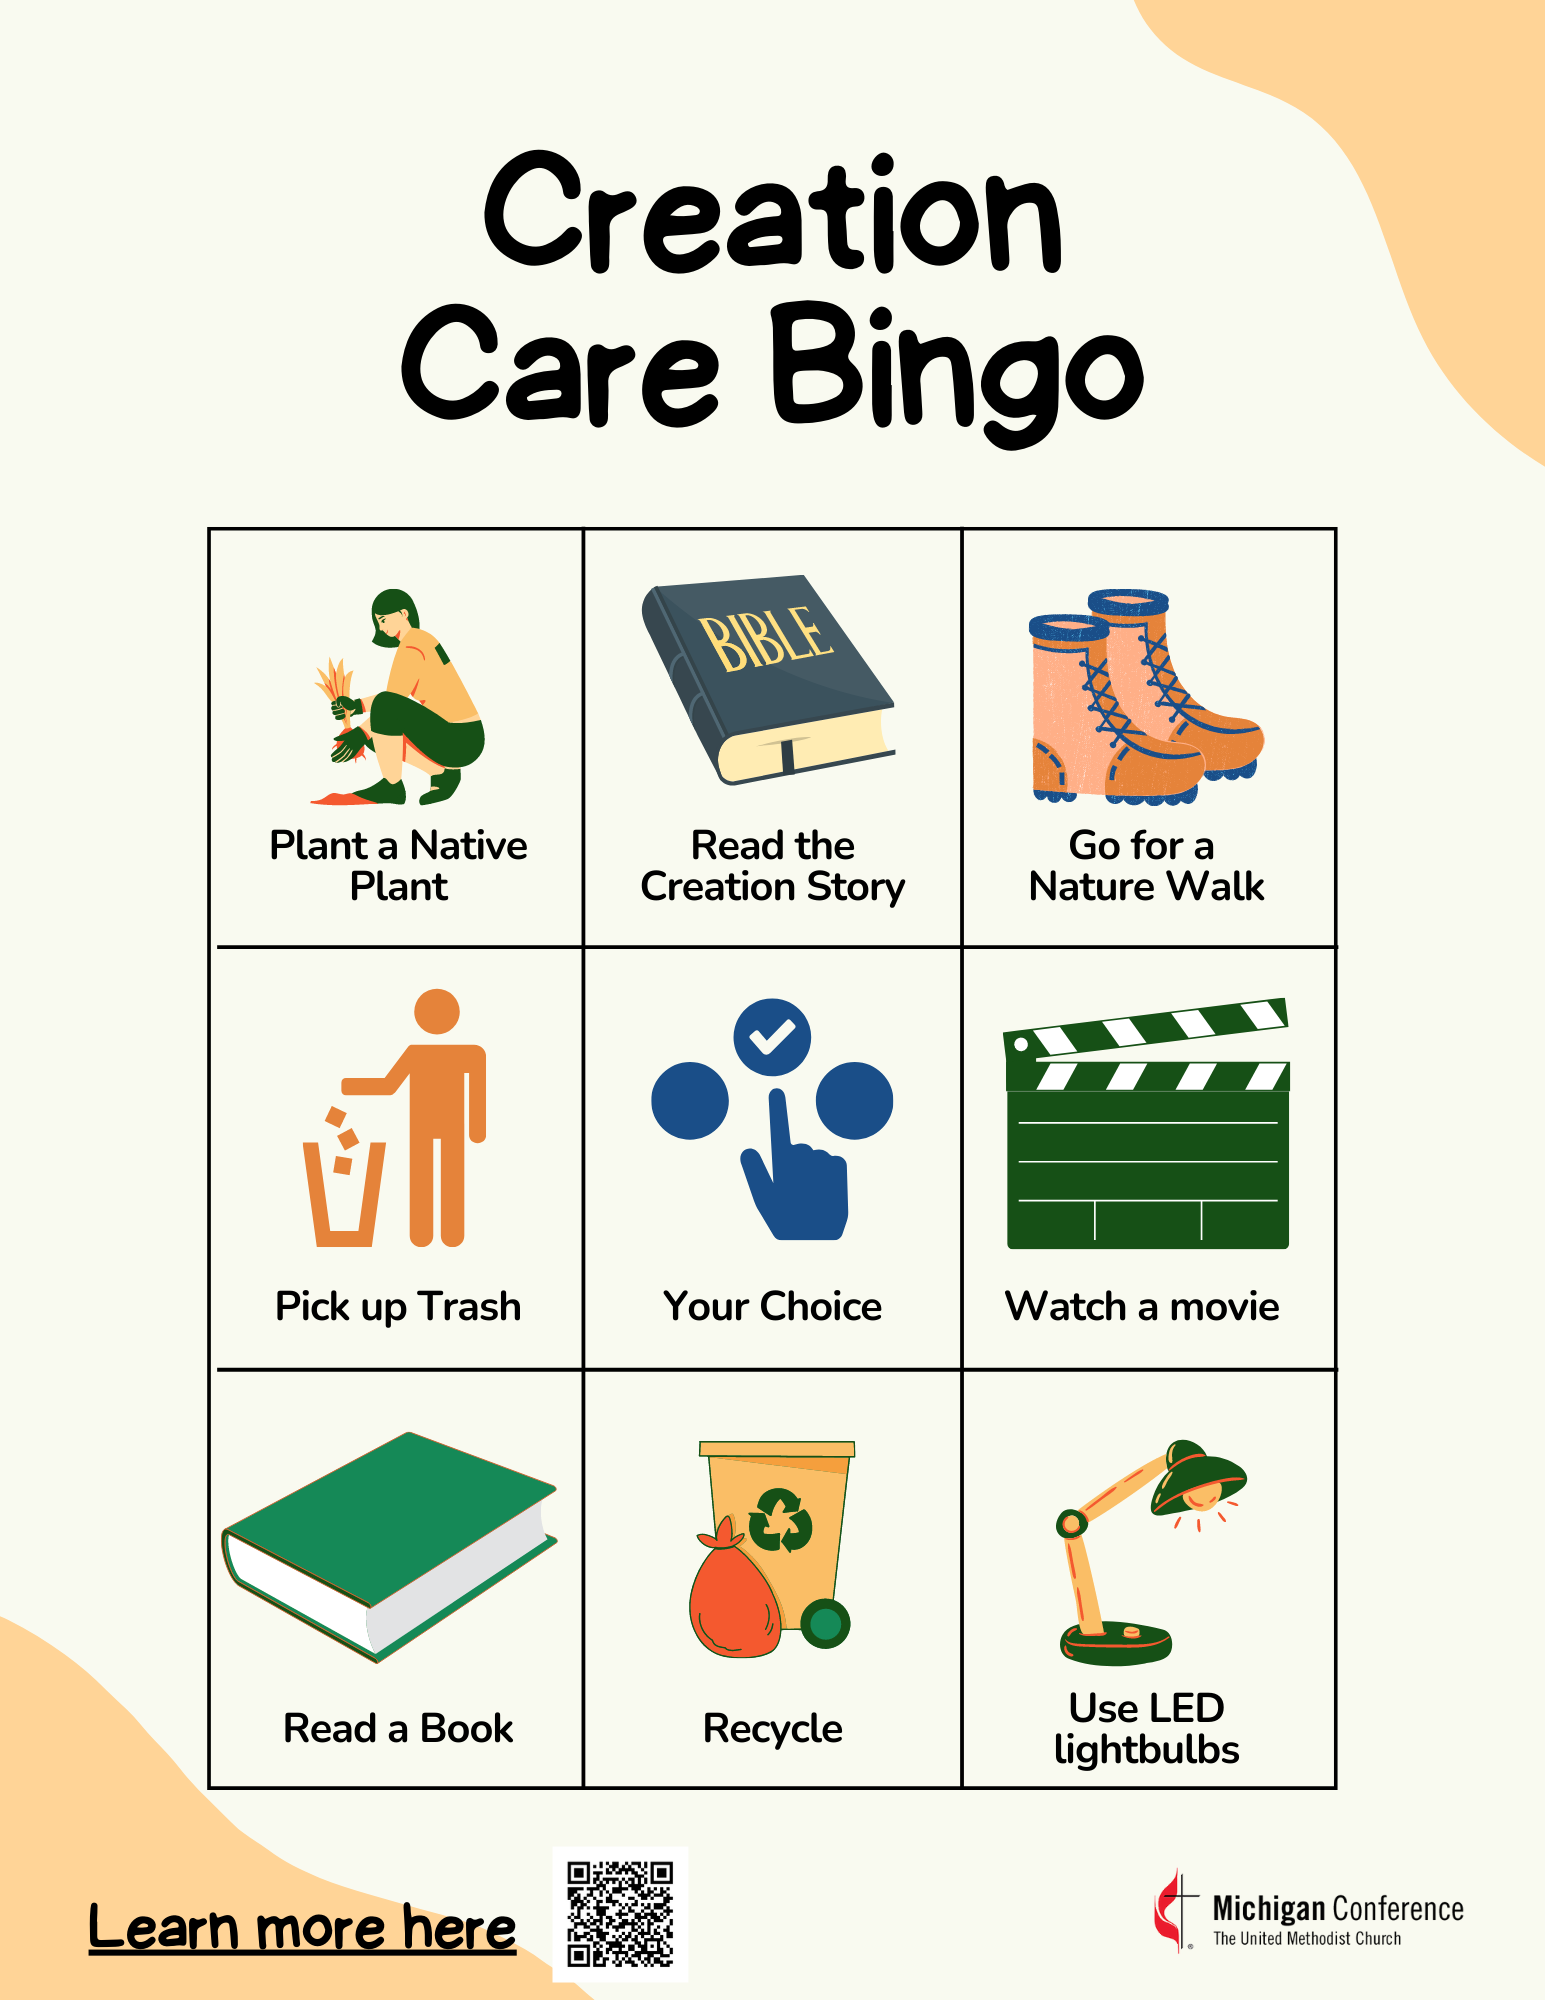 creation care bingo with 9 images of different ideas for earth day